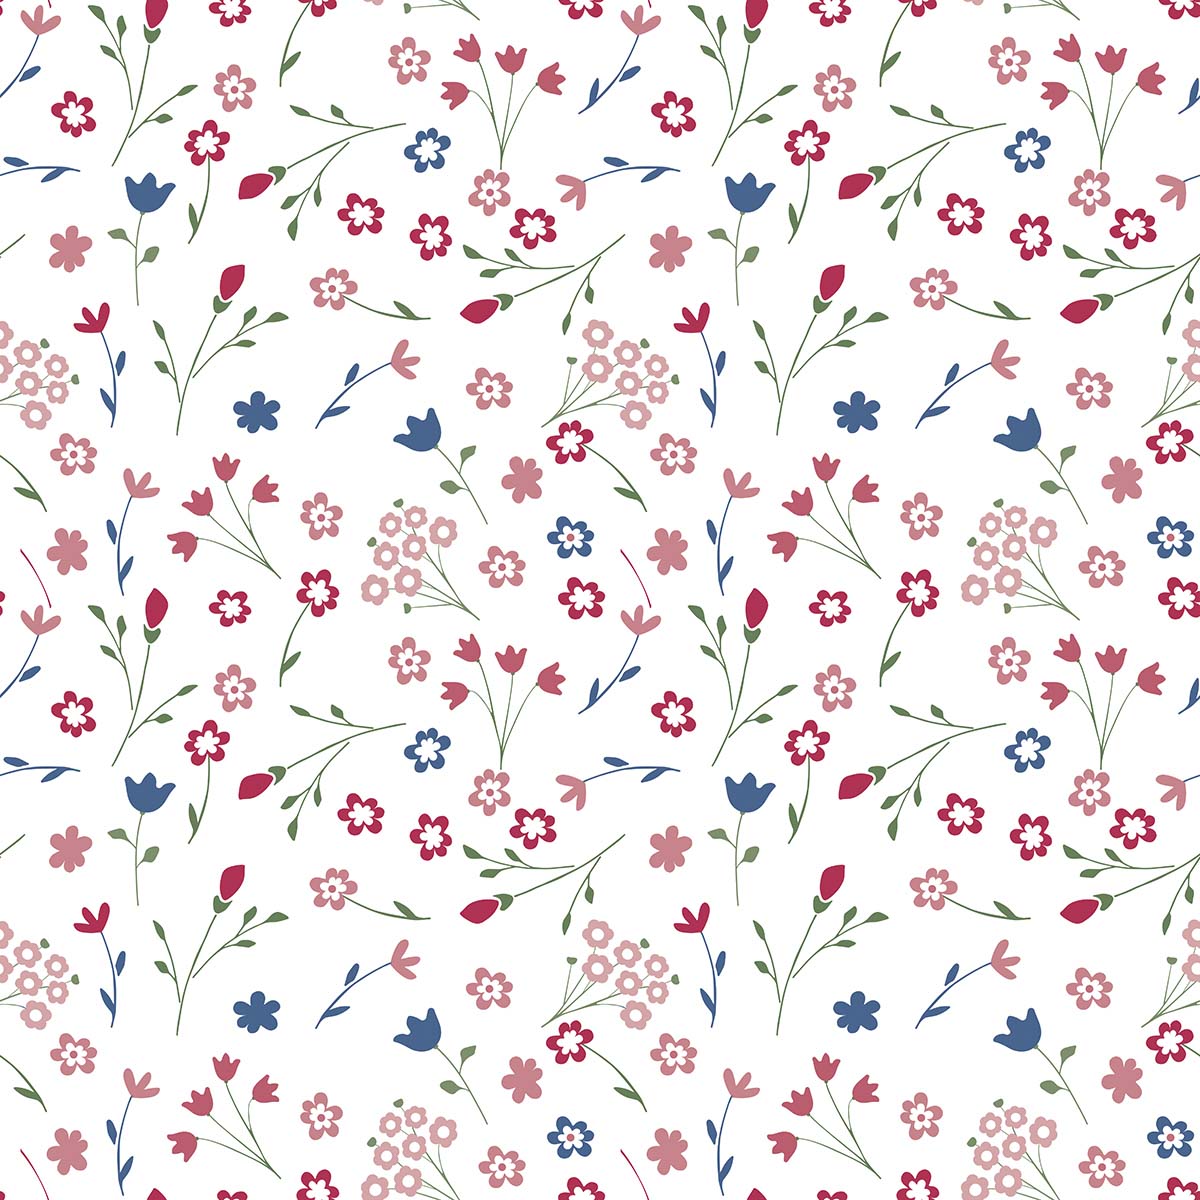 A pattern of small flowers